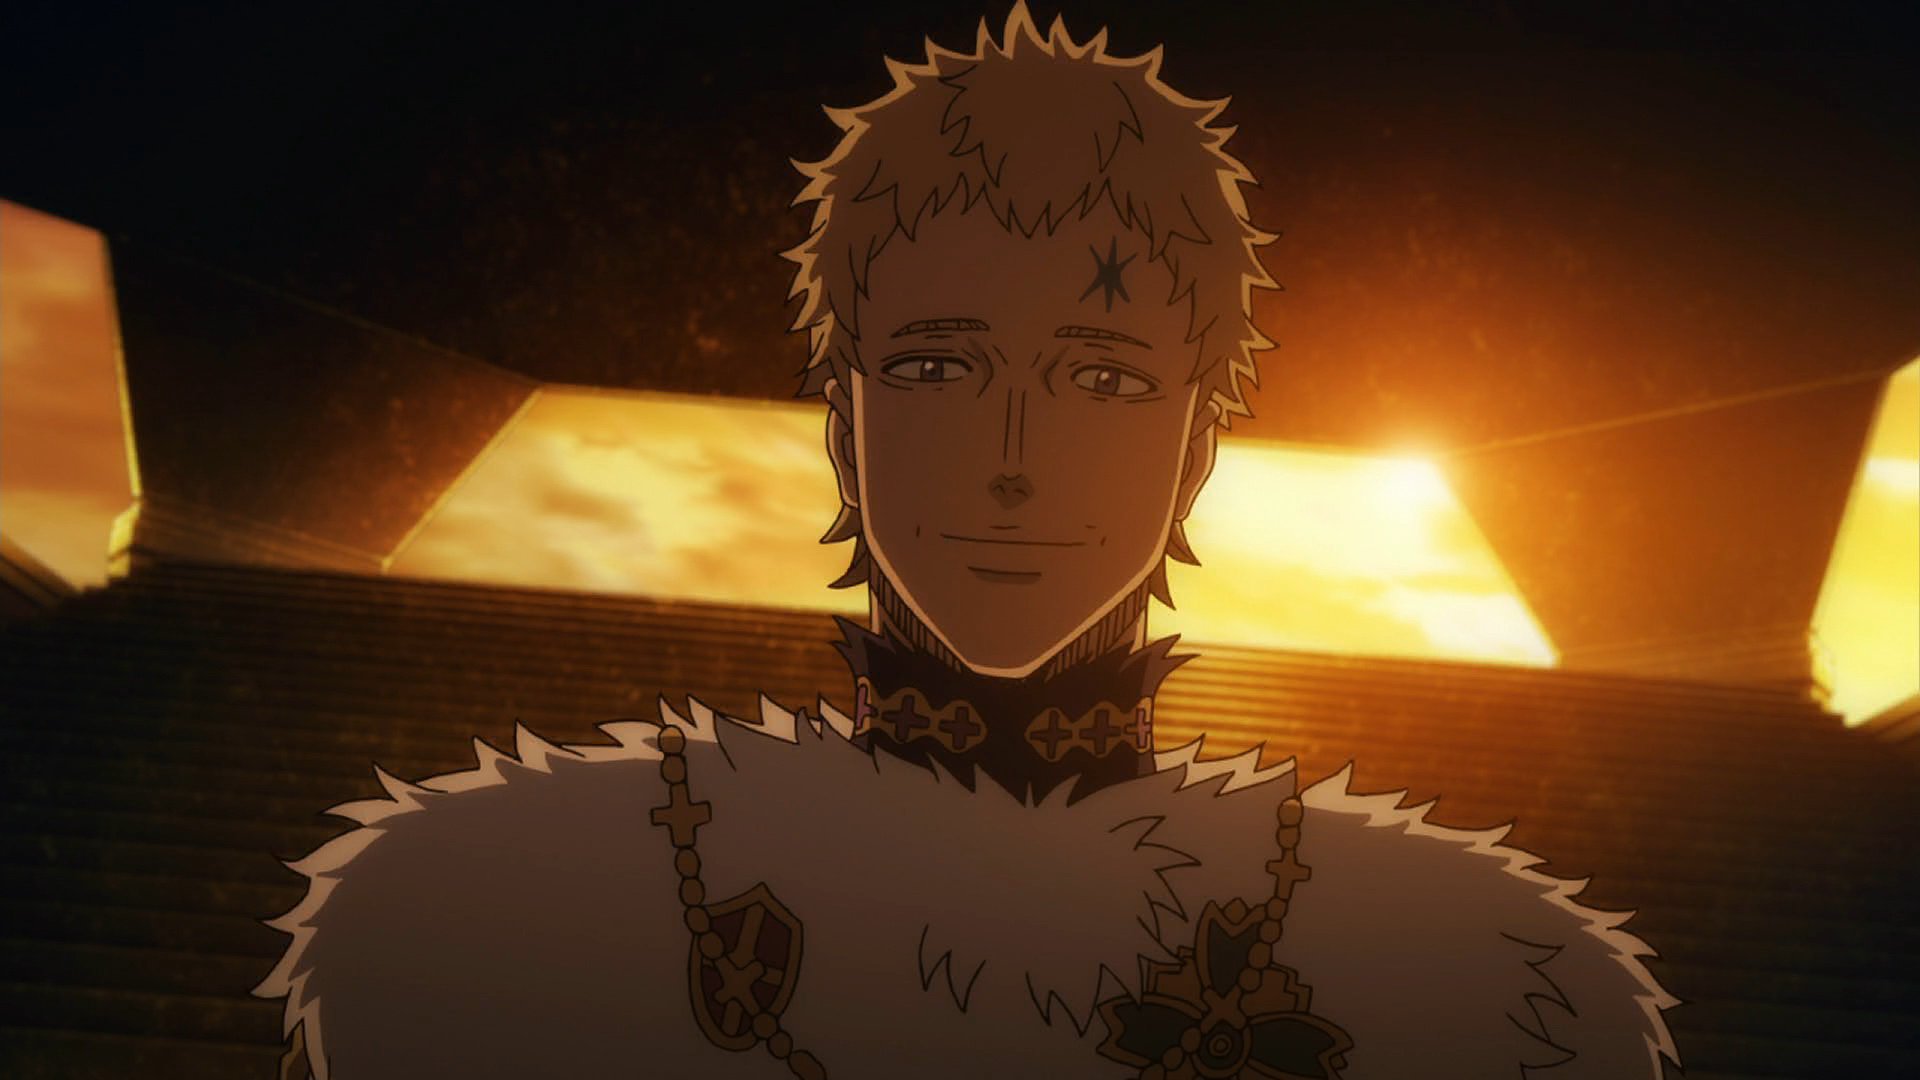  BLACK CLOVER on Julius is the Wizard King